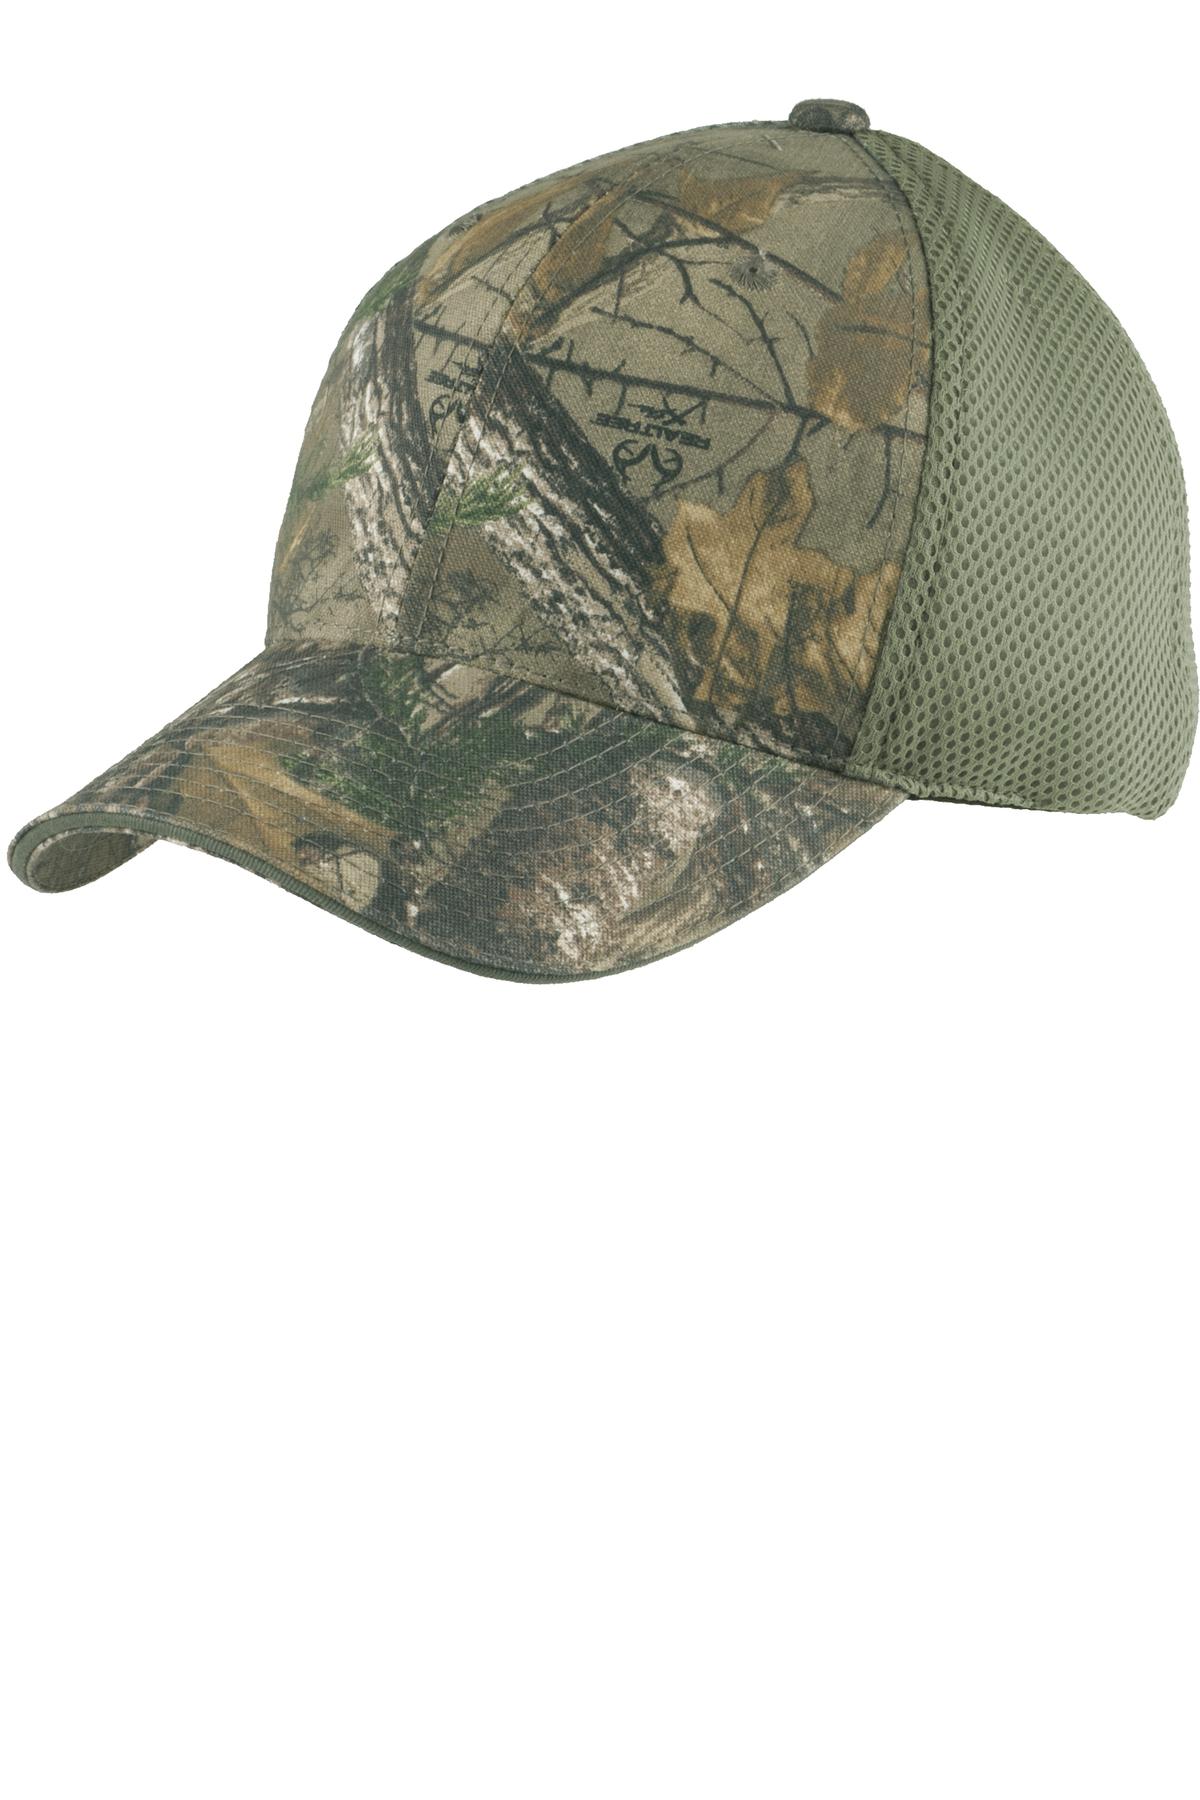 Port Authority Camouflage Cap with Air Mesh Back-Port Authority